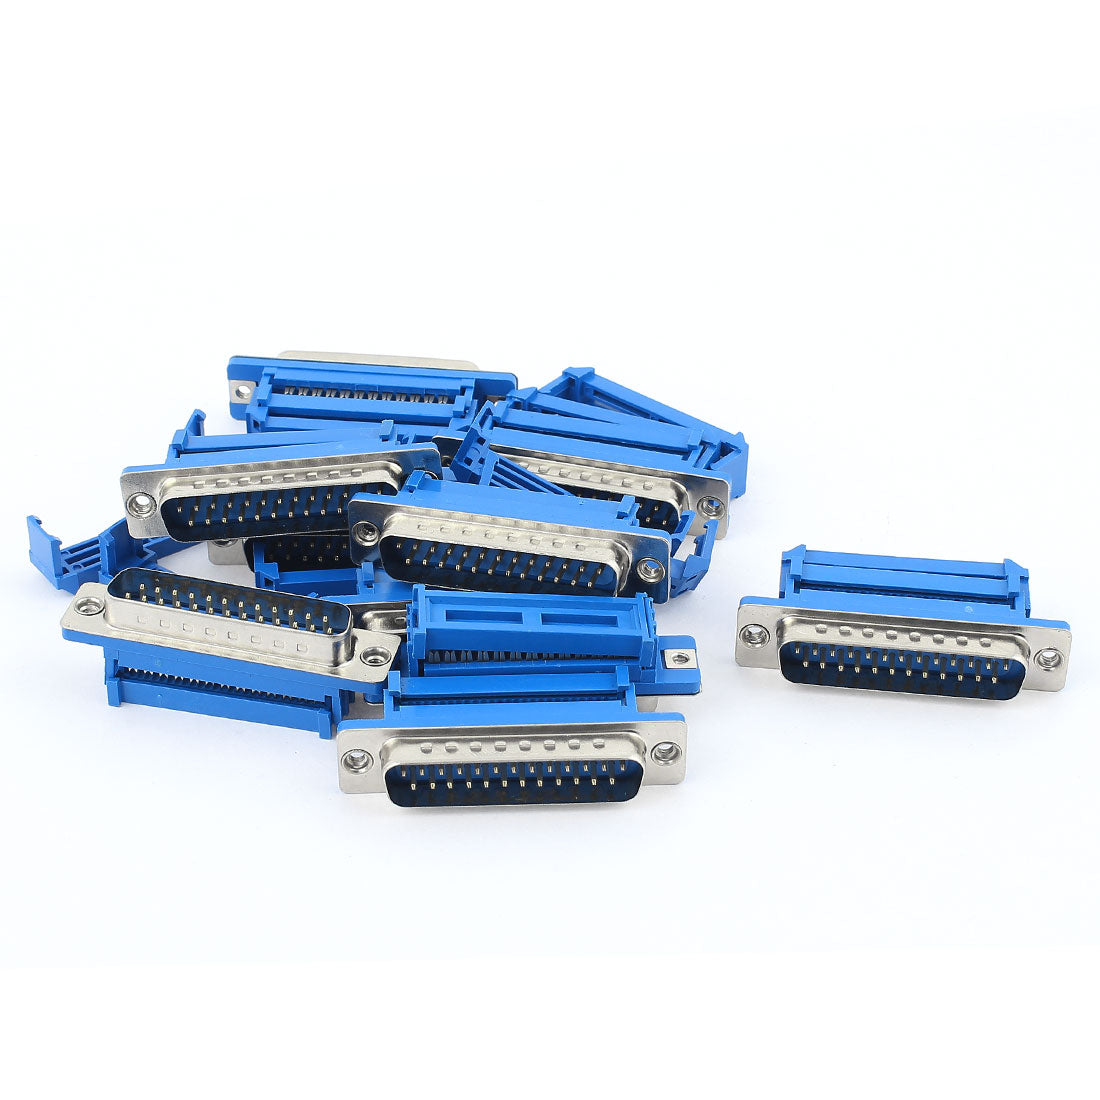 uxcell Uxcell 10Pcs Parallel Port D-SUB DB25 25-Pin Male IDC Flat Cable Connector